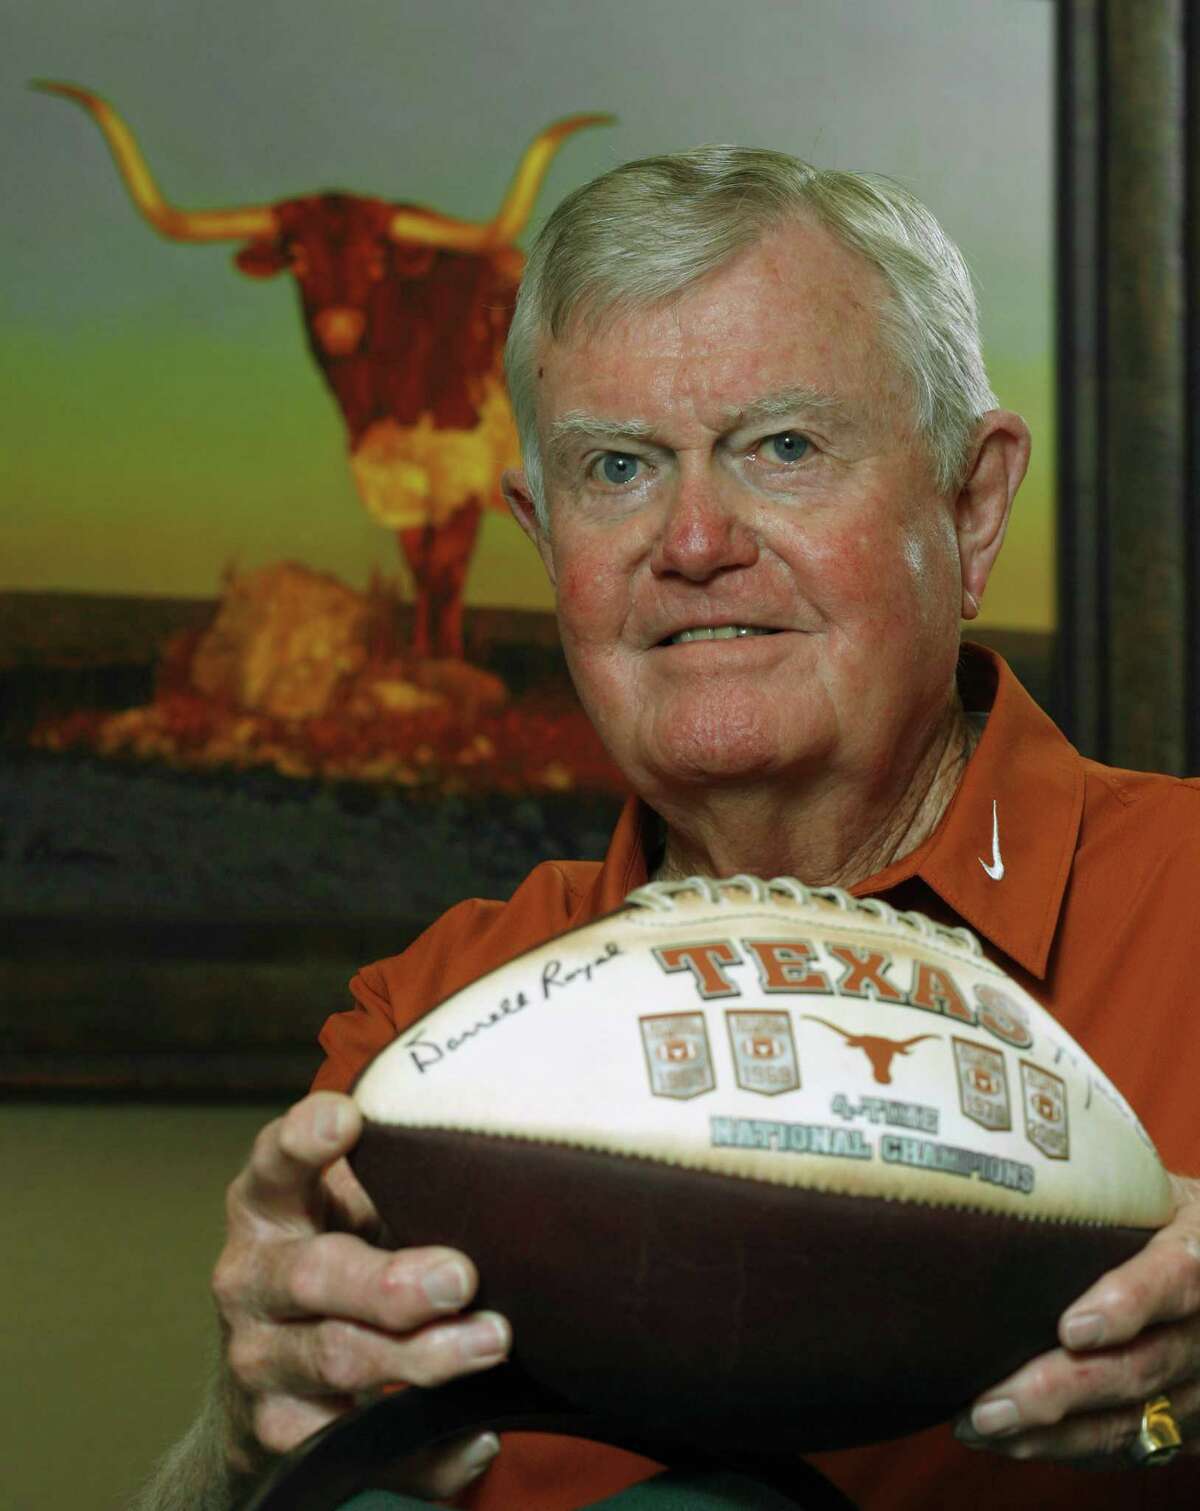 Former Texas head football coach Darrell Royal is shown at his apartment complex Tuesday, Sept. 18, 2007, in Austin, Texas. He began as head coach of the Longhorns 50 years ago. (AP Photo/Harry Cabluck)